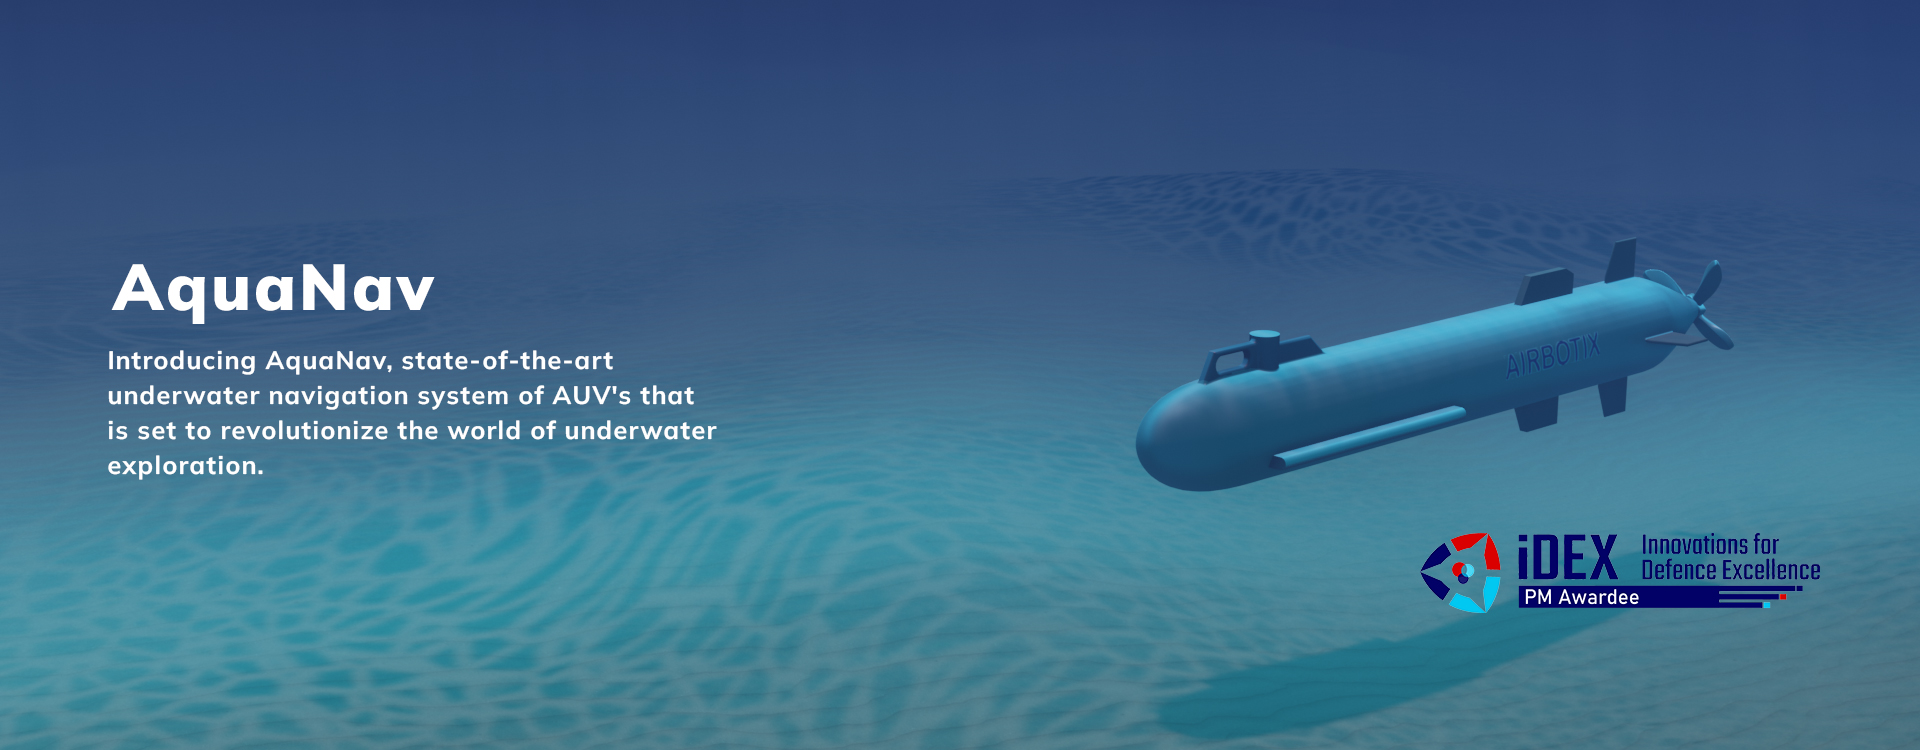 I. Introduction to Underwater Navigation